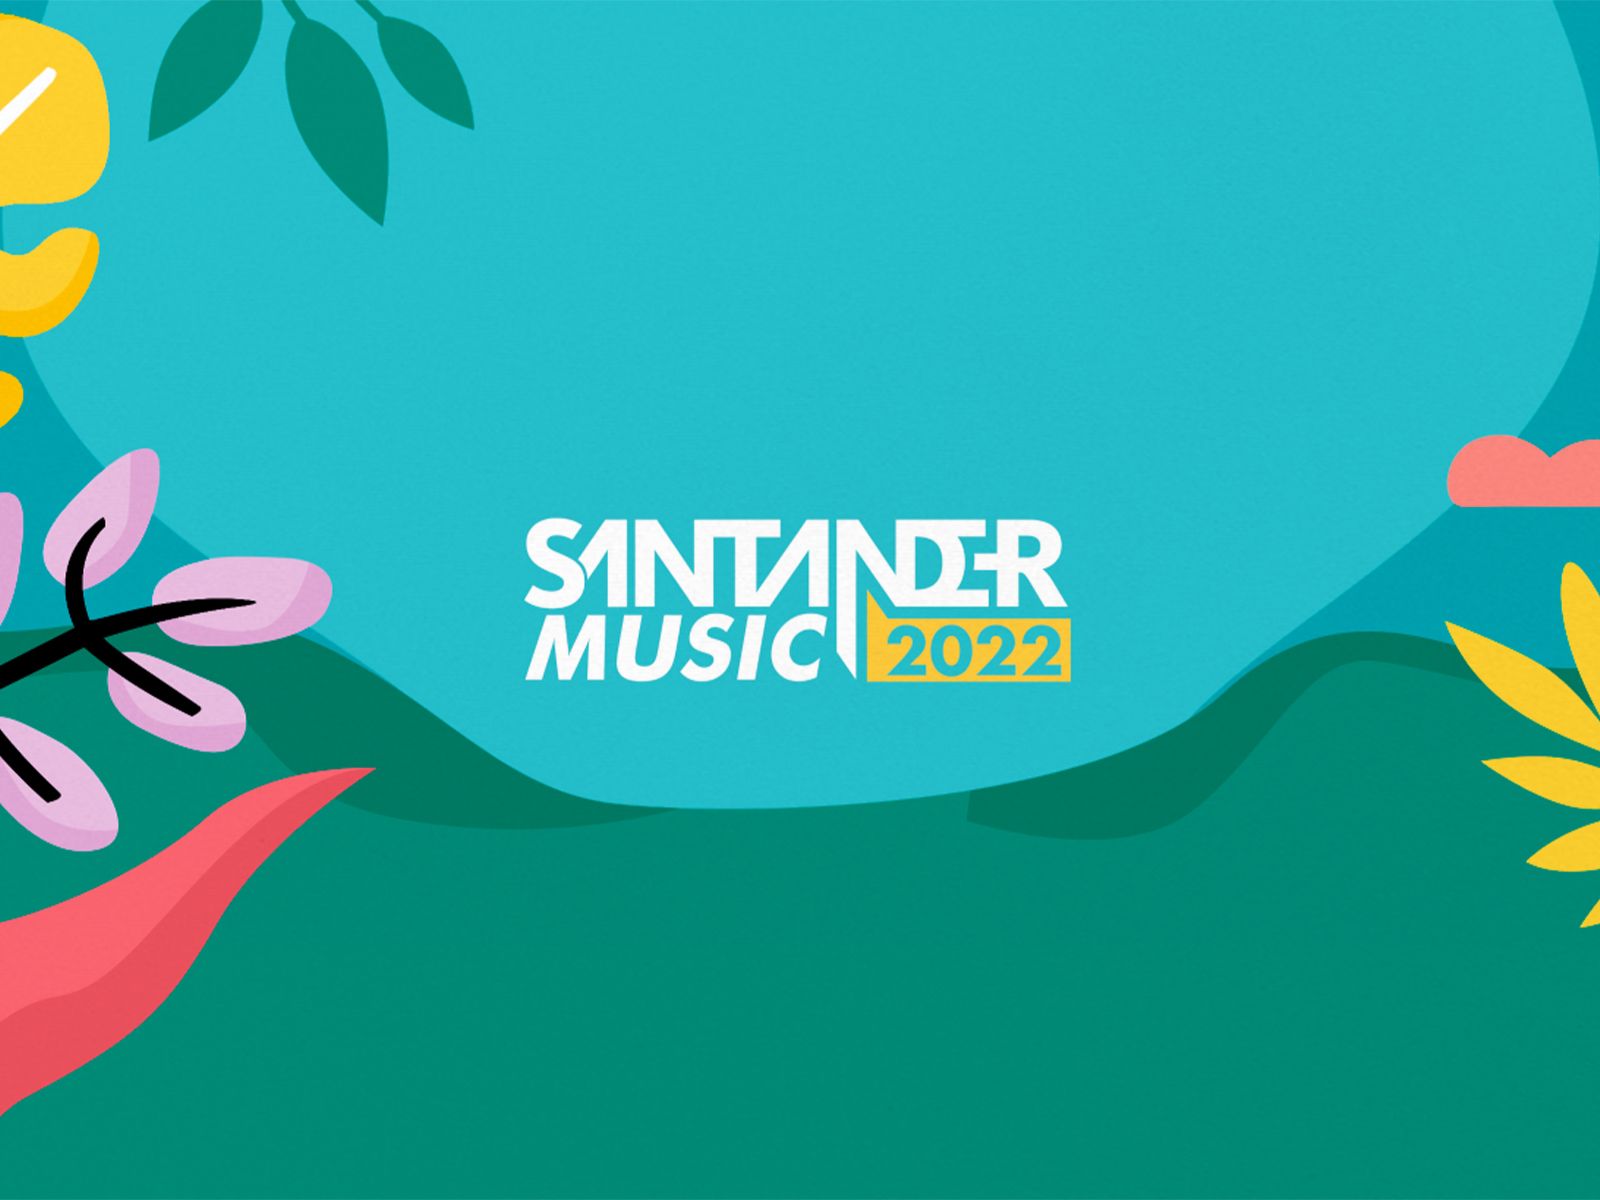 Santander Music: These are the official timetables for the twelfth edition of the festival